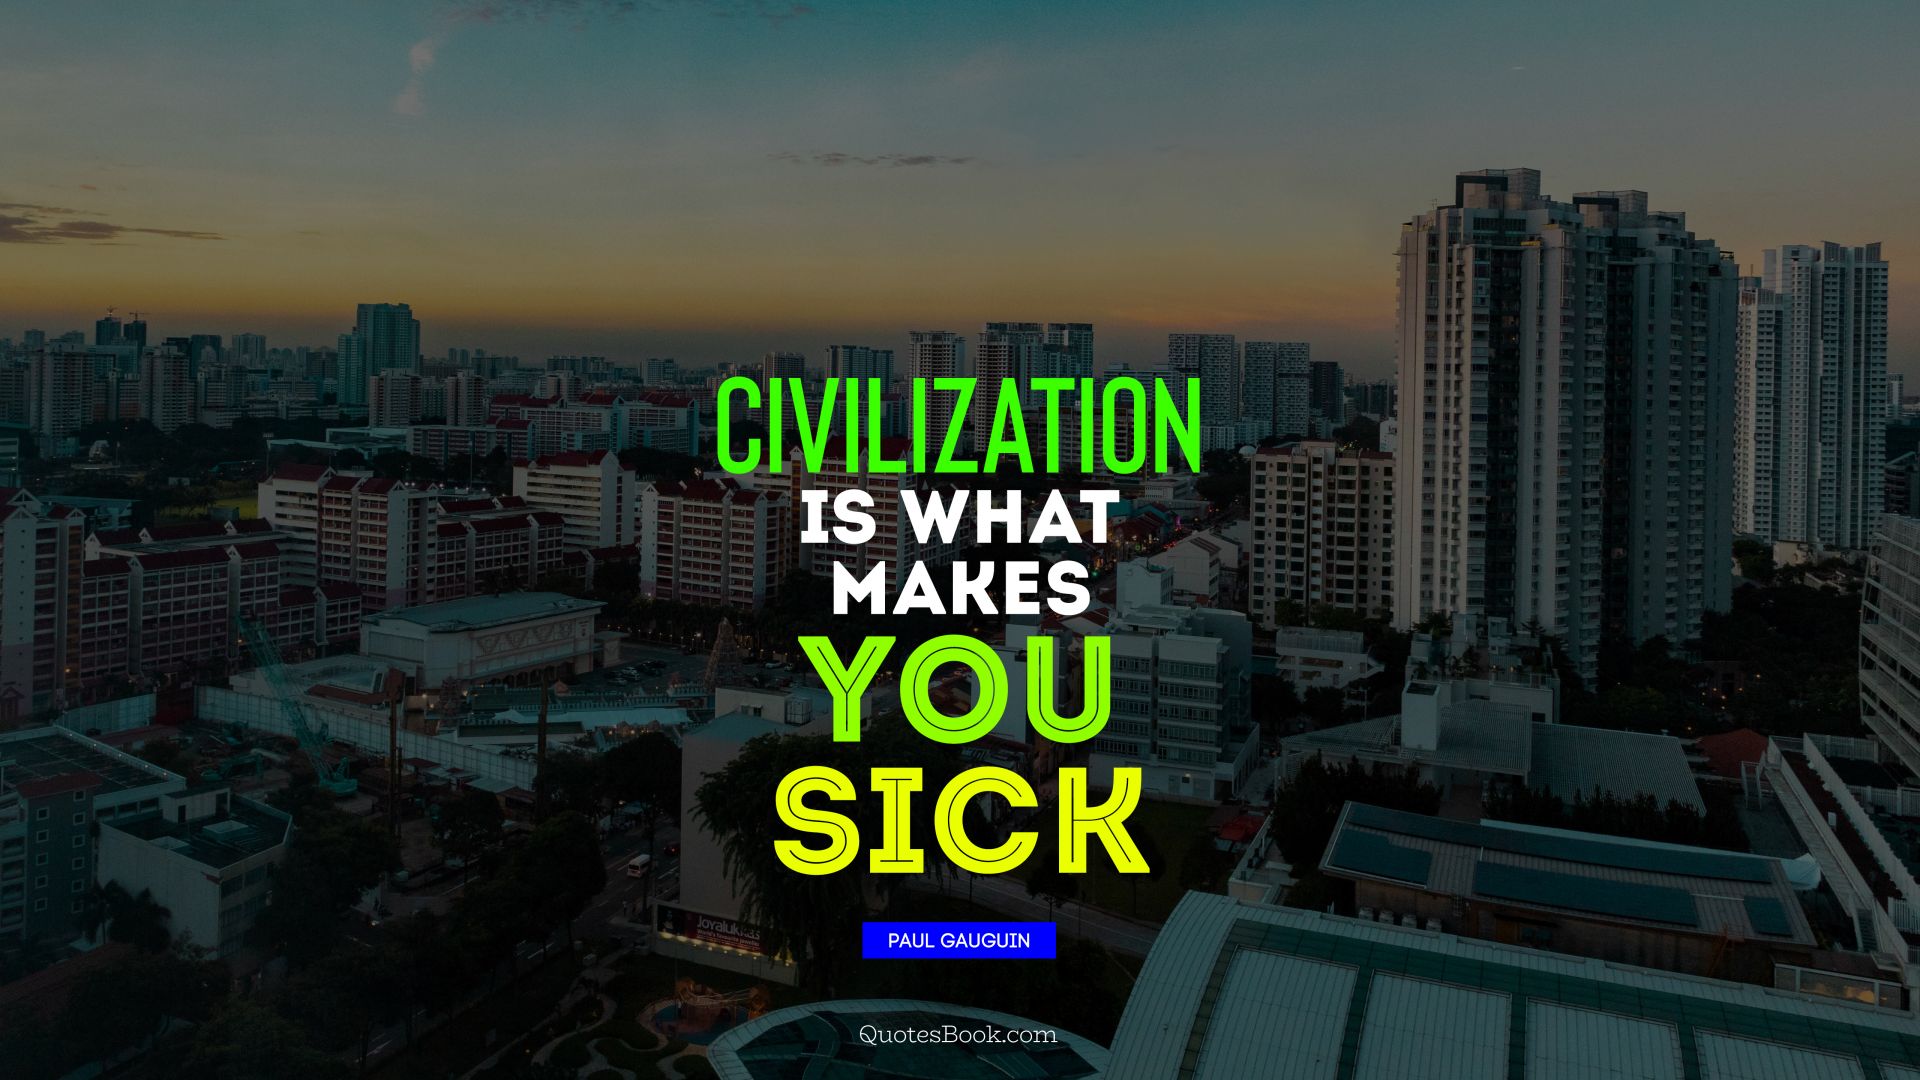 Civilization is what makes you sick. - Quote by Paul Gauguin